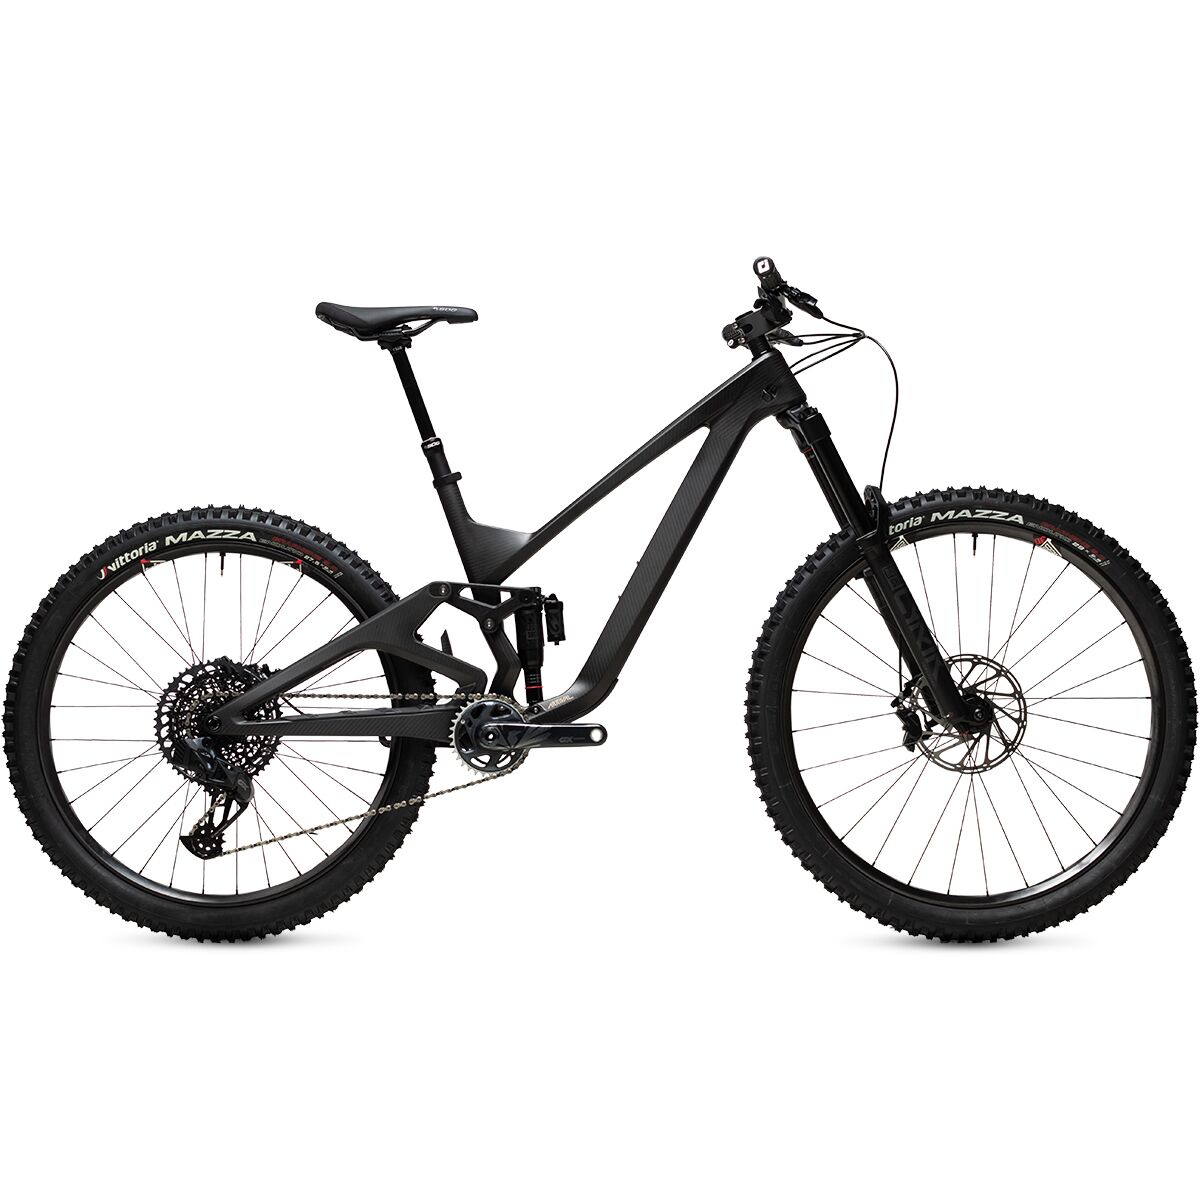 We Are One Arrival 152 SP3 GX AXS MX Carbon Wheel Mountain Bike